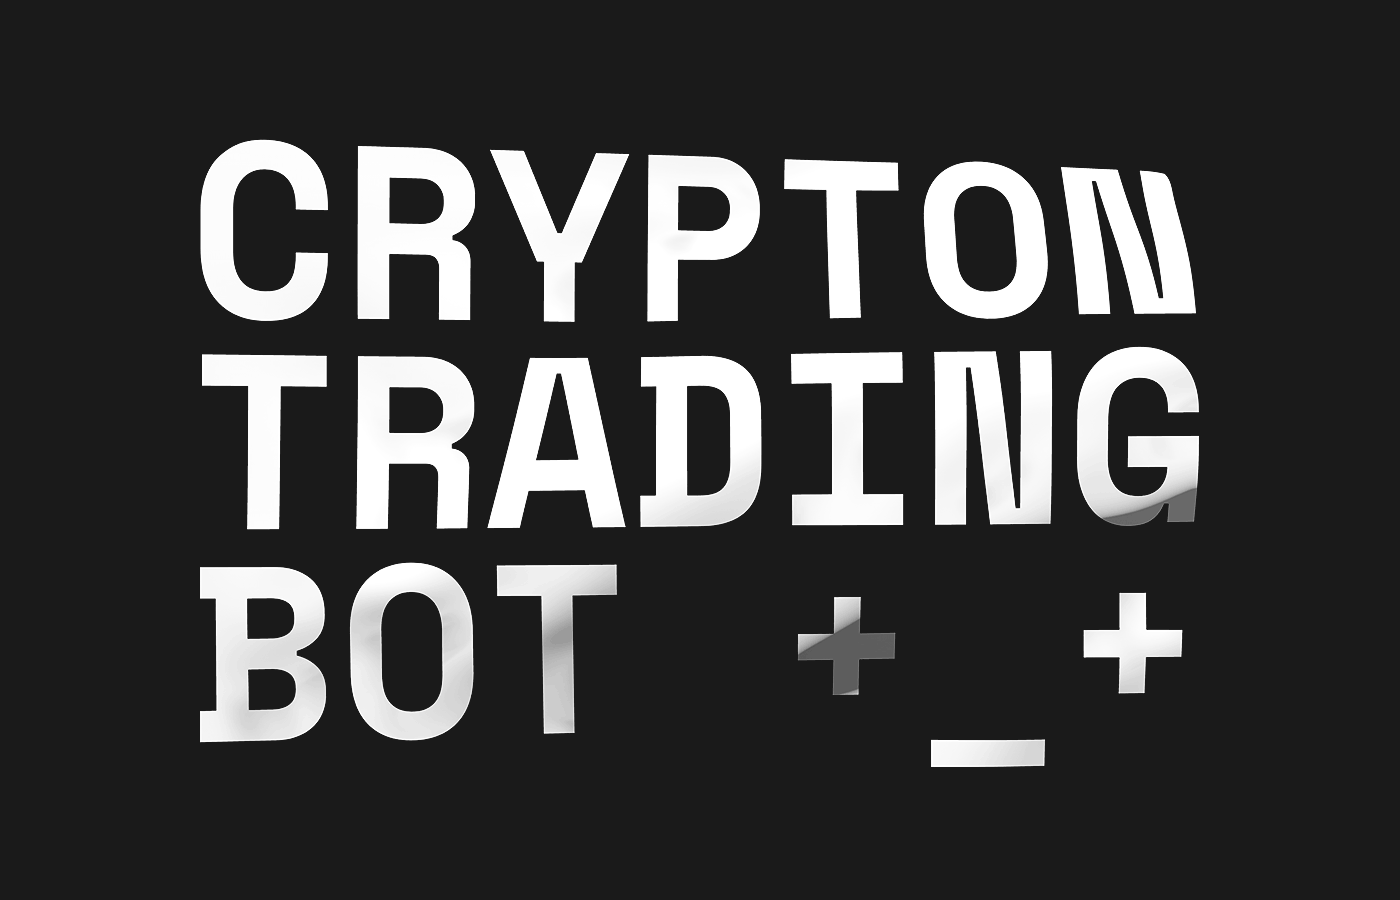 cryptocurrency crypto currency Web bot trading bitcoin ethereum Ico blockchain